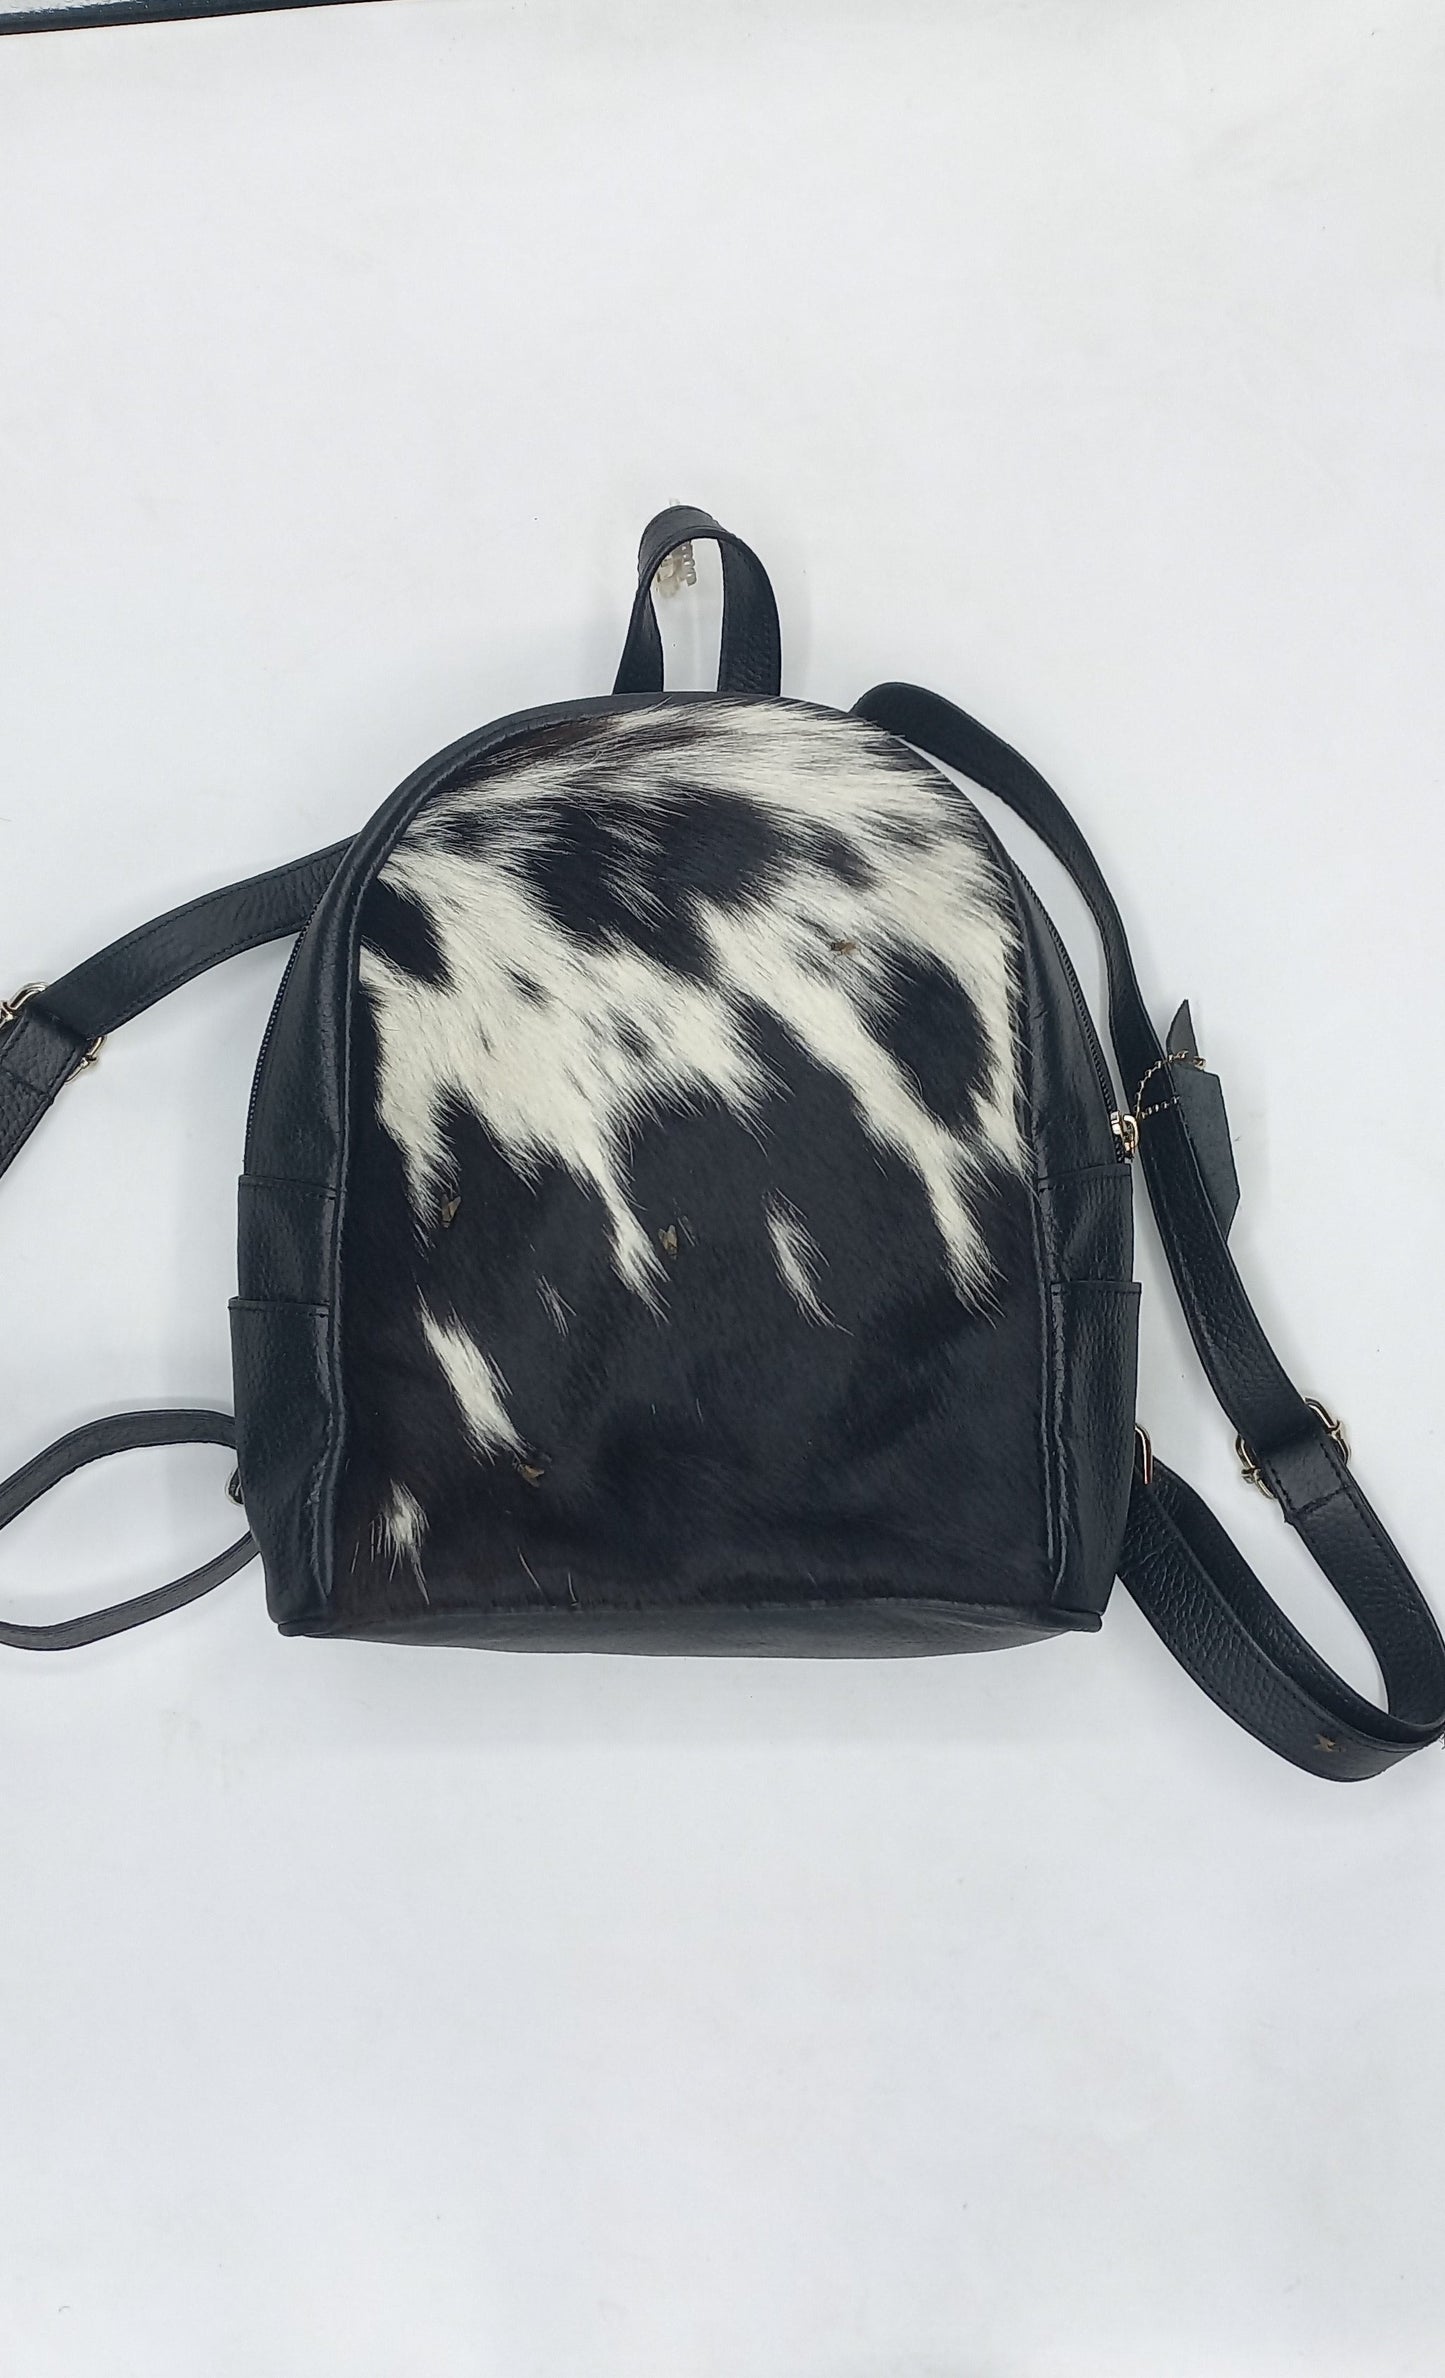 Stylish cow skin backpack featuring a spacious interior, making it ideal for carrying essentials while exuding urban flair.